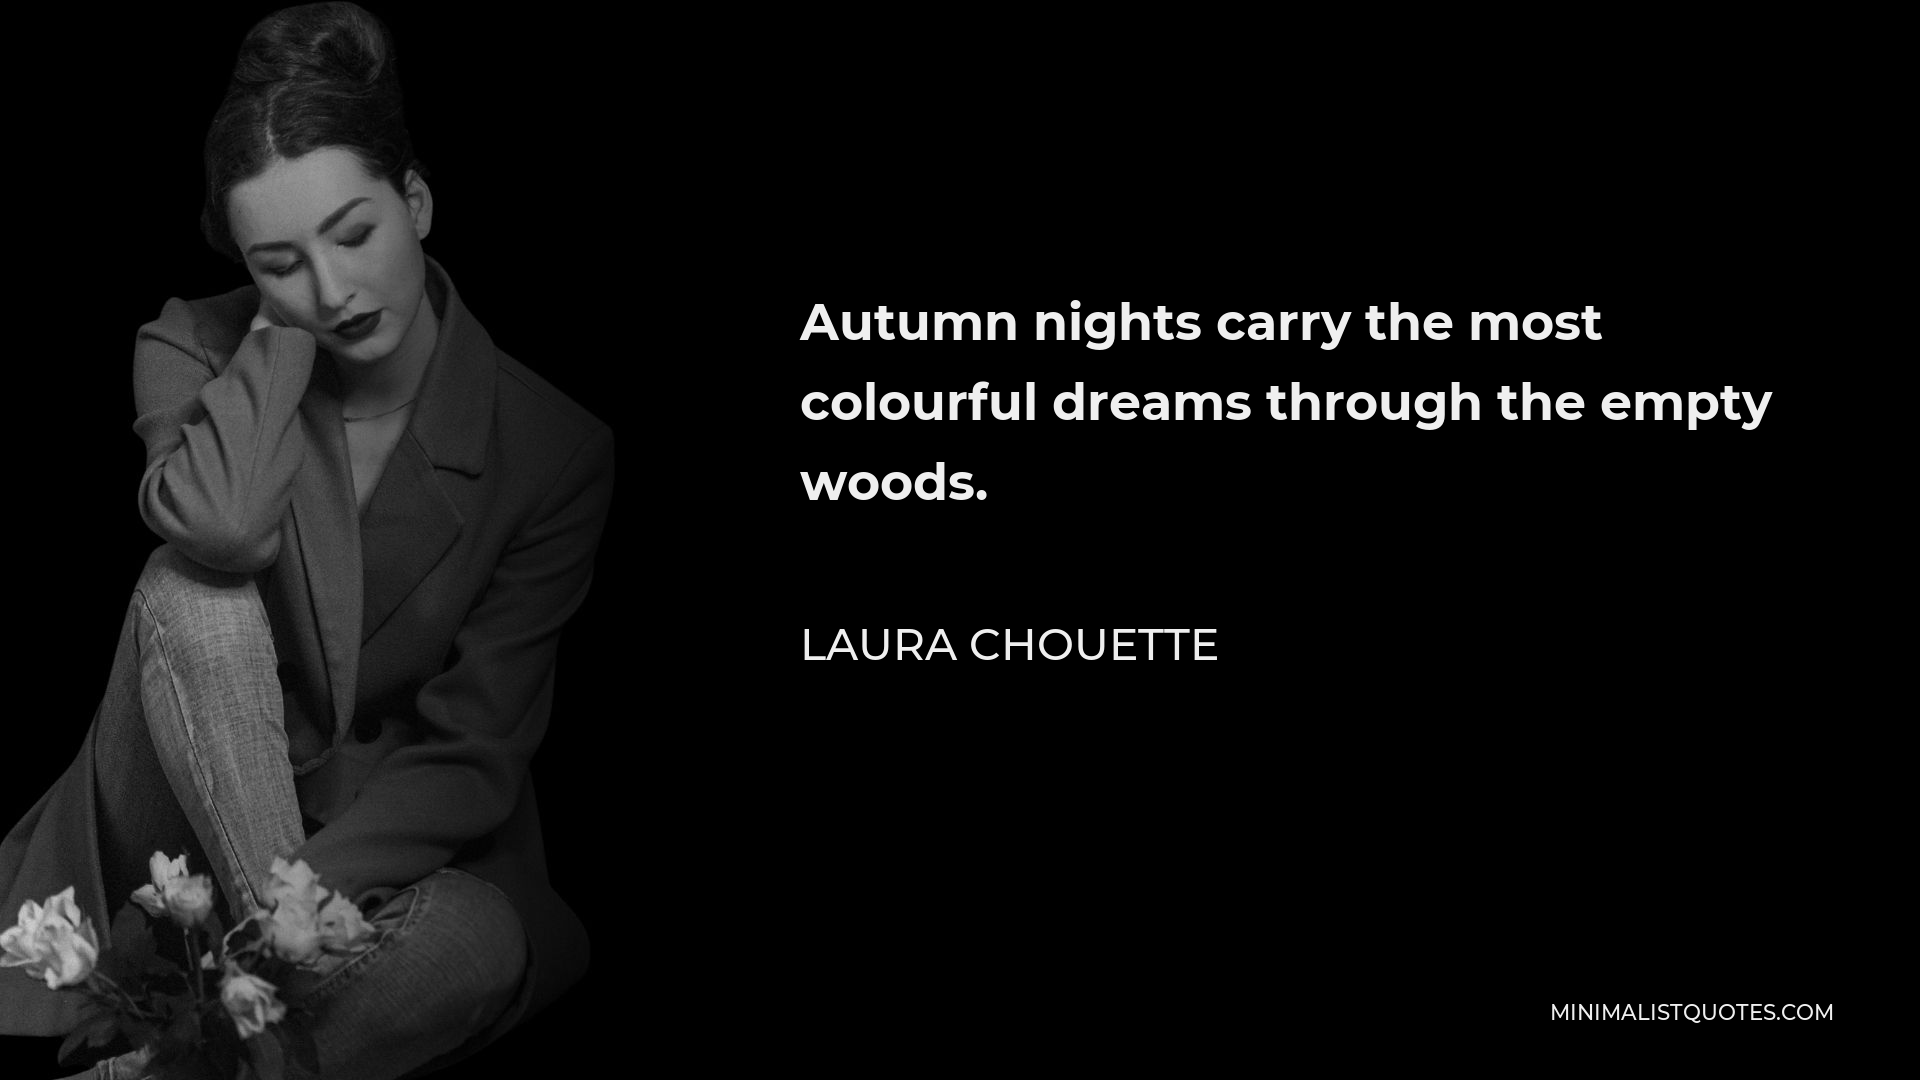 Laura Chouette Quote - Autumn nights carry the most colourful dreams through the empty woods.